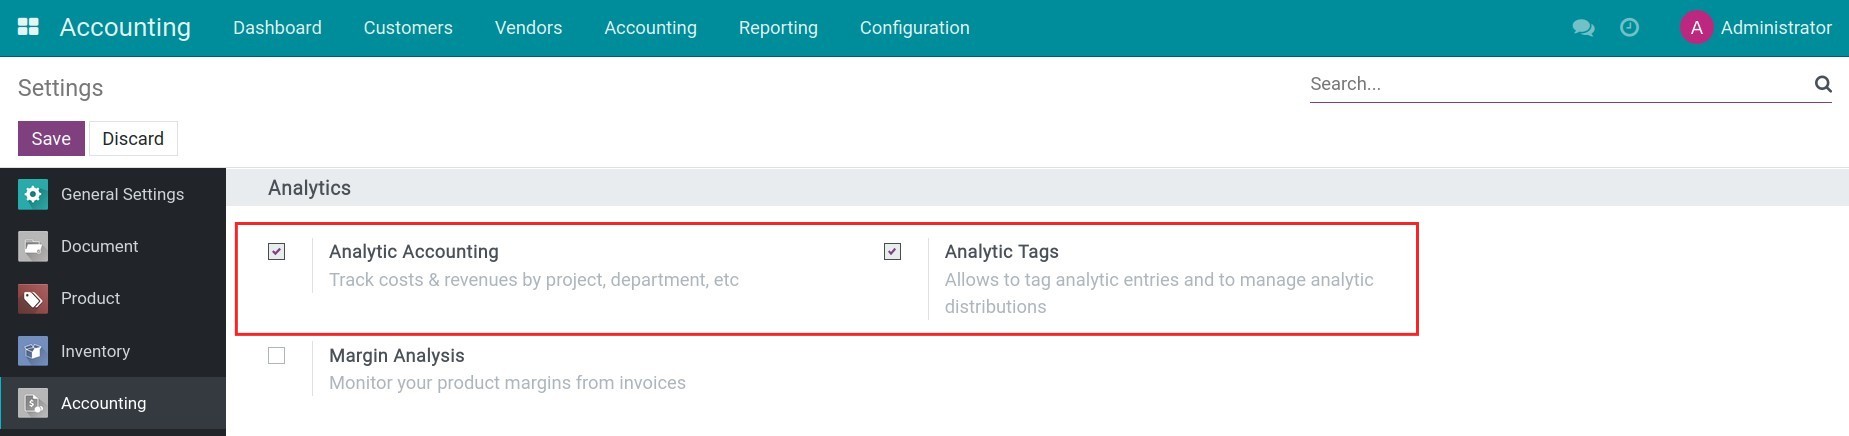 Activate Analytic accounting feature